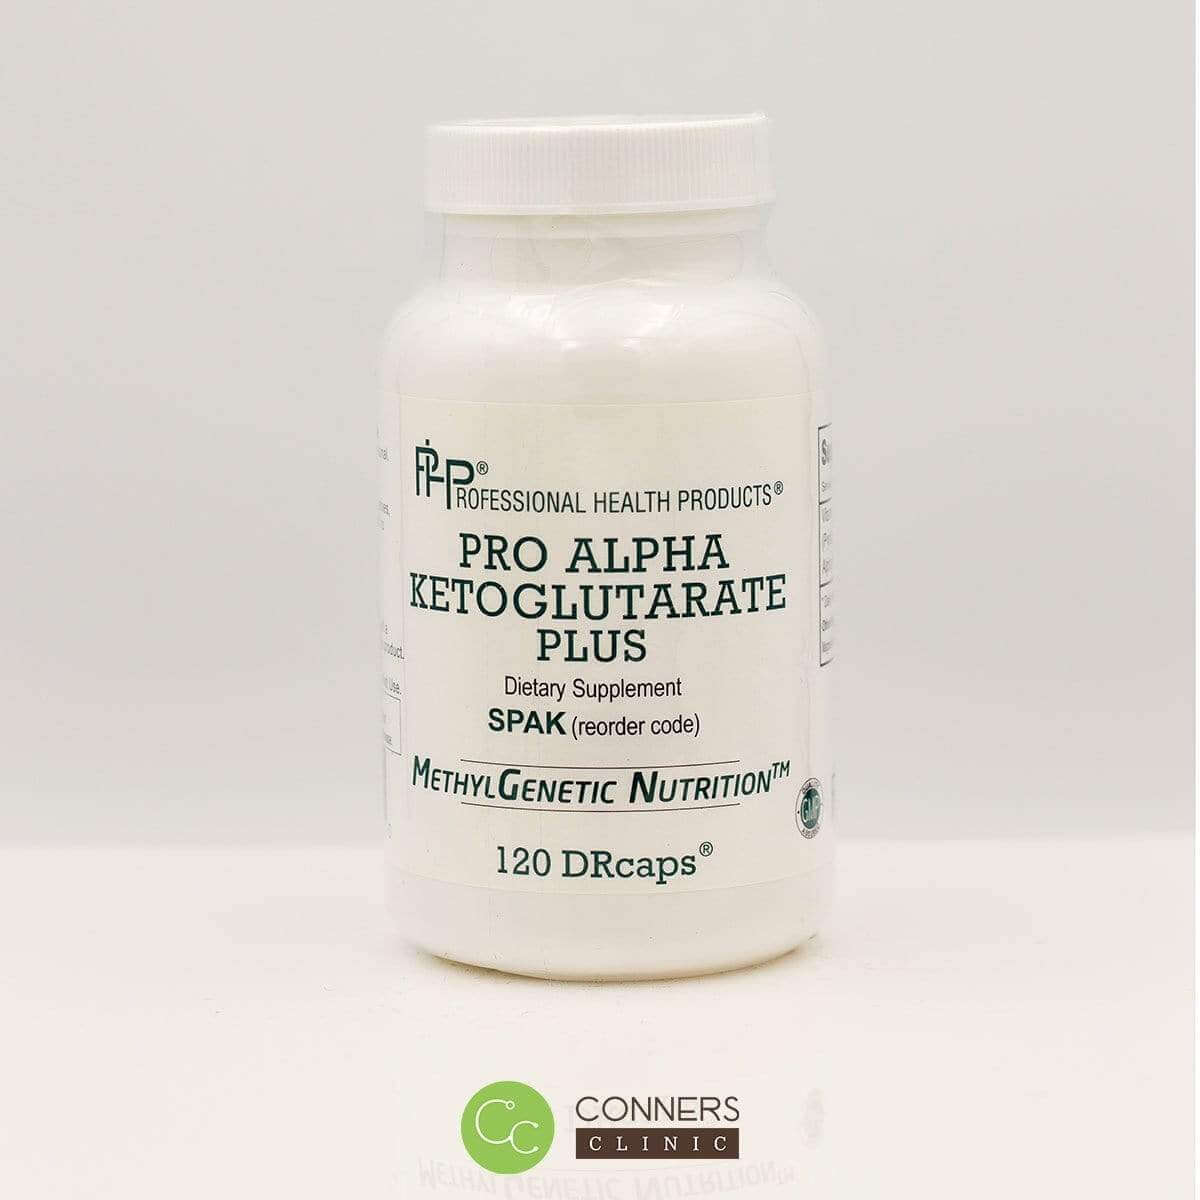 Pro Alpha Ketoglutarate Plus -  120 Caps Prof Health Products Supplement - Conners Clinic